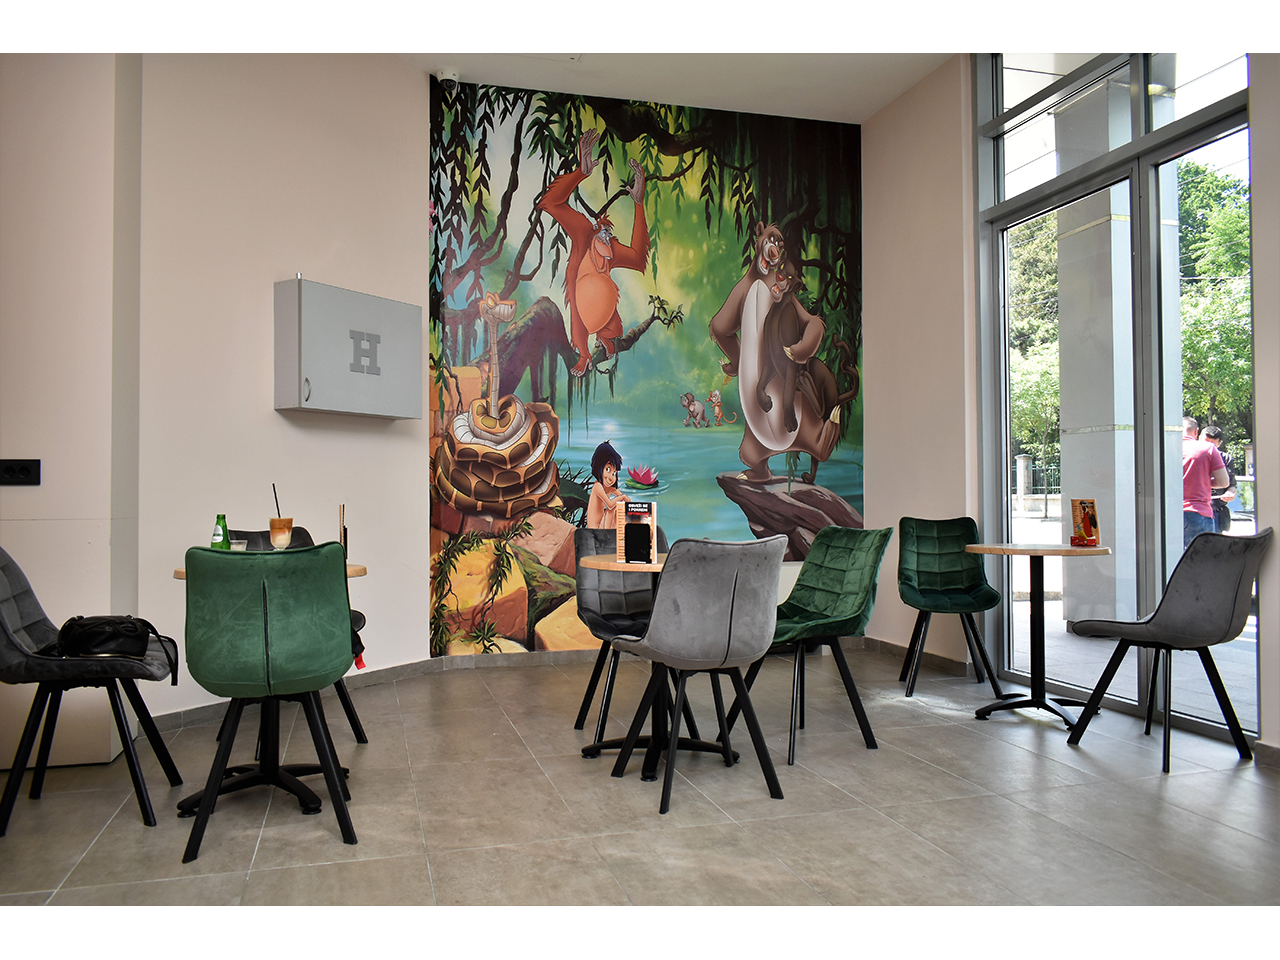 CAFE AND CHILDREN'S PLAYROOM SPARTANAC Kids playgrounds Beograd